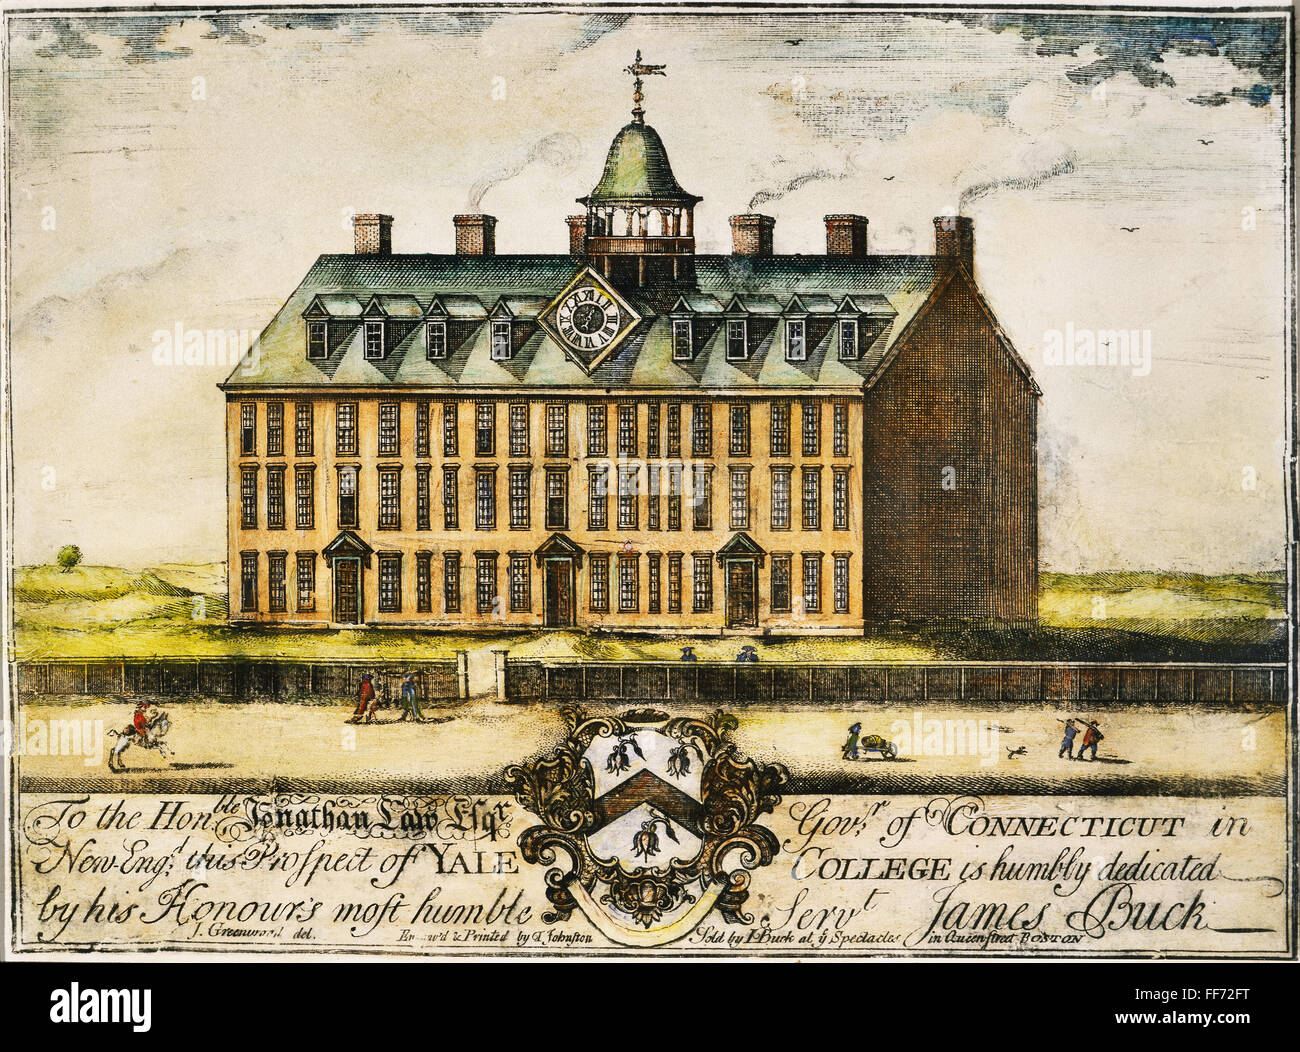 YALE COLLEGE, 1749. /nLine engraving. Stock Photo